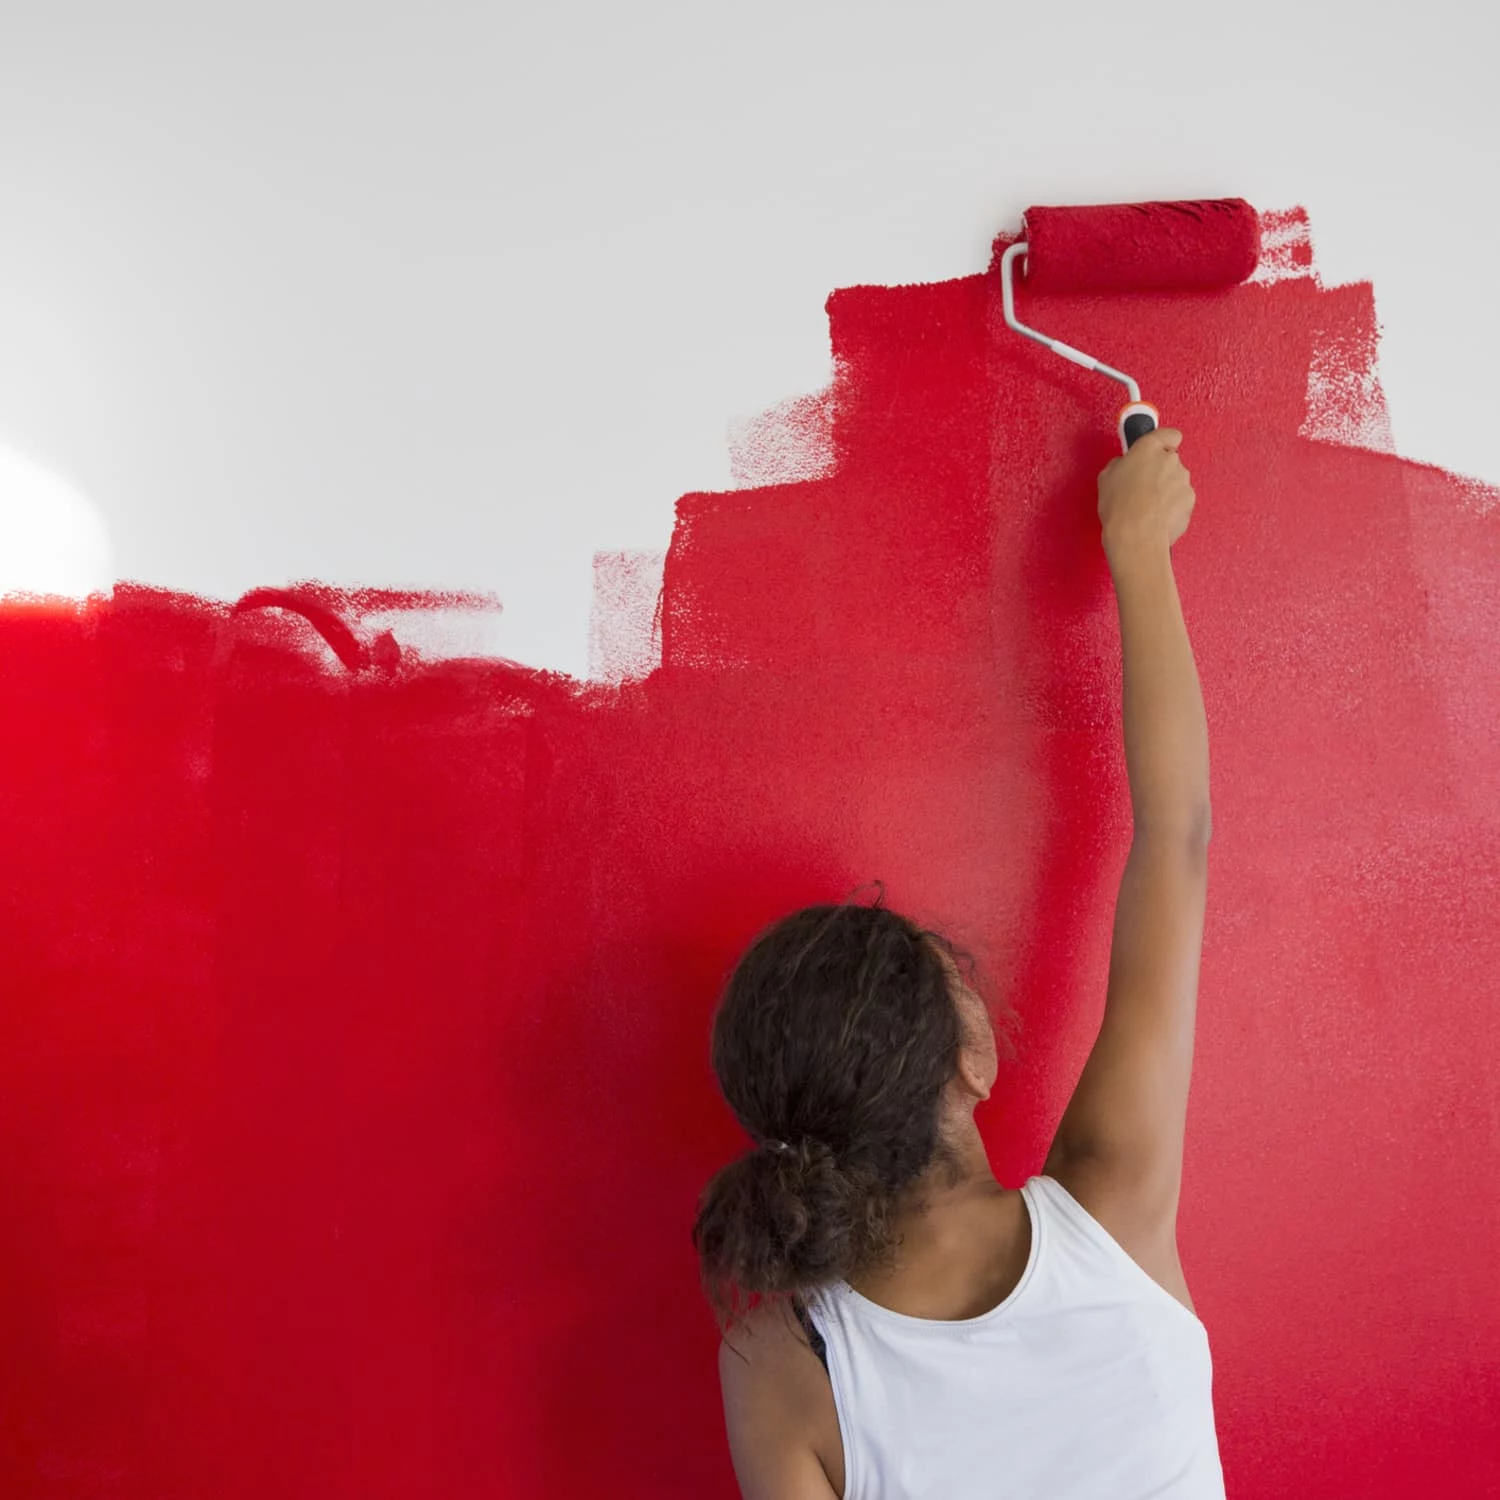 how to make paint dry faster woman painting a wall bright red